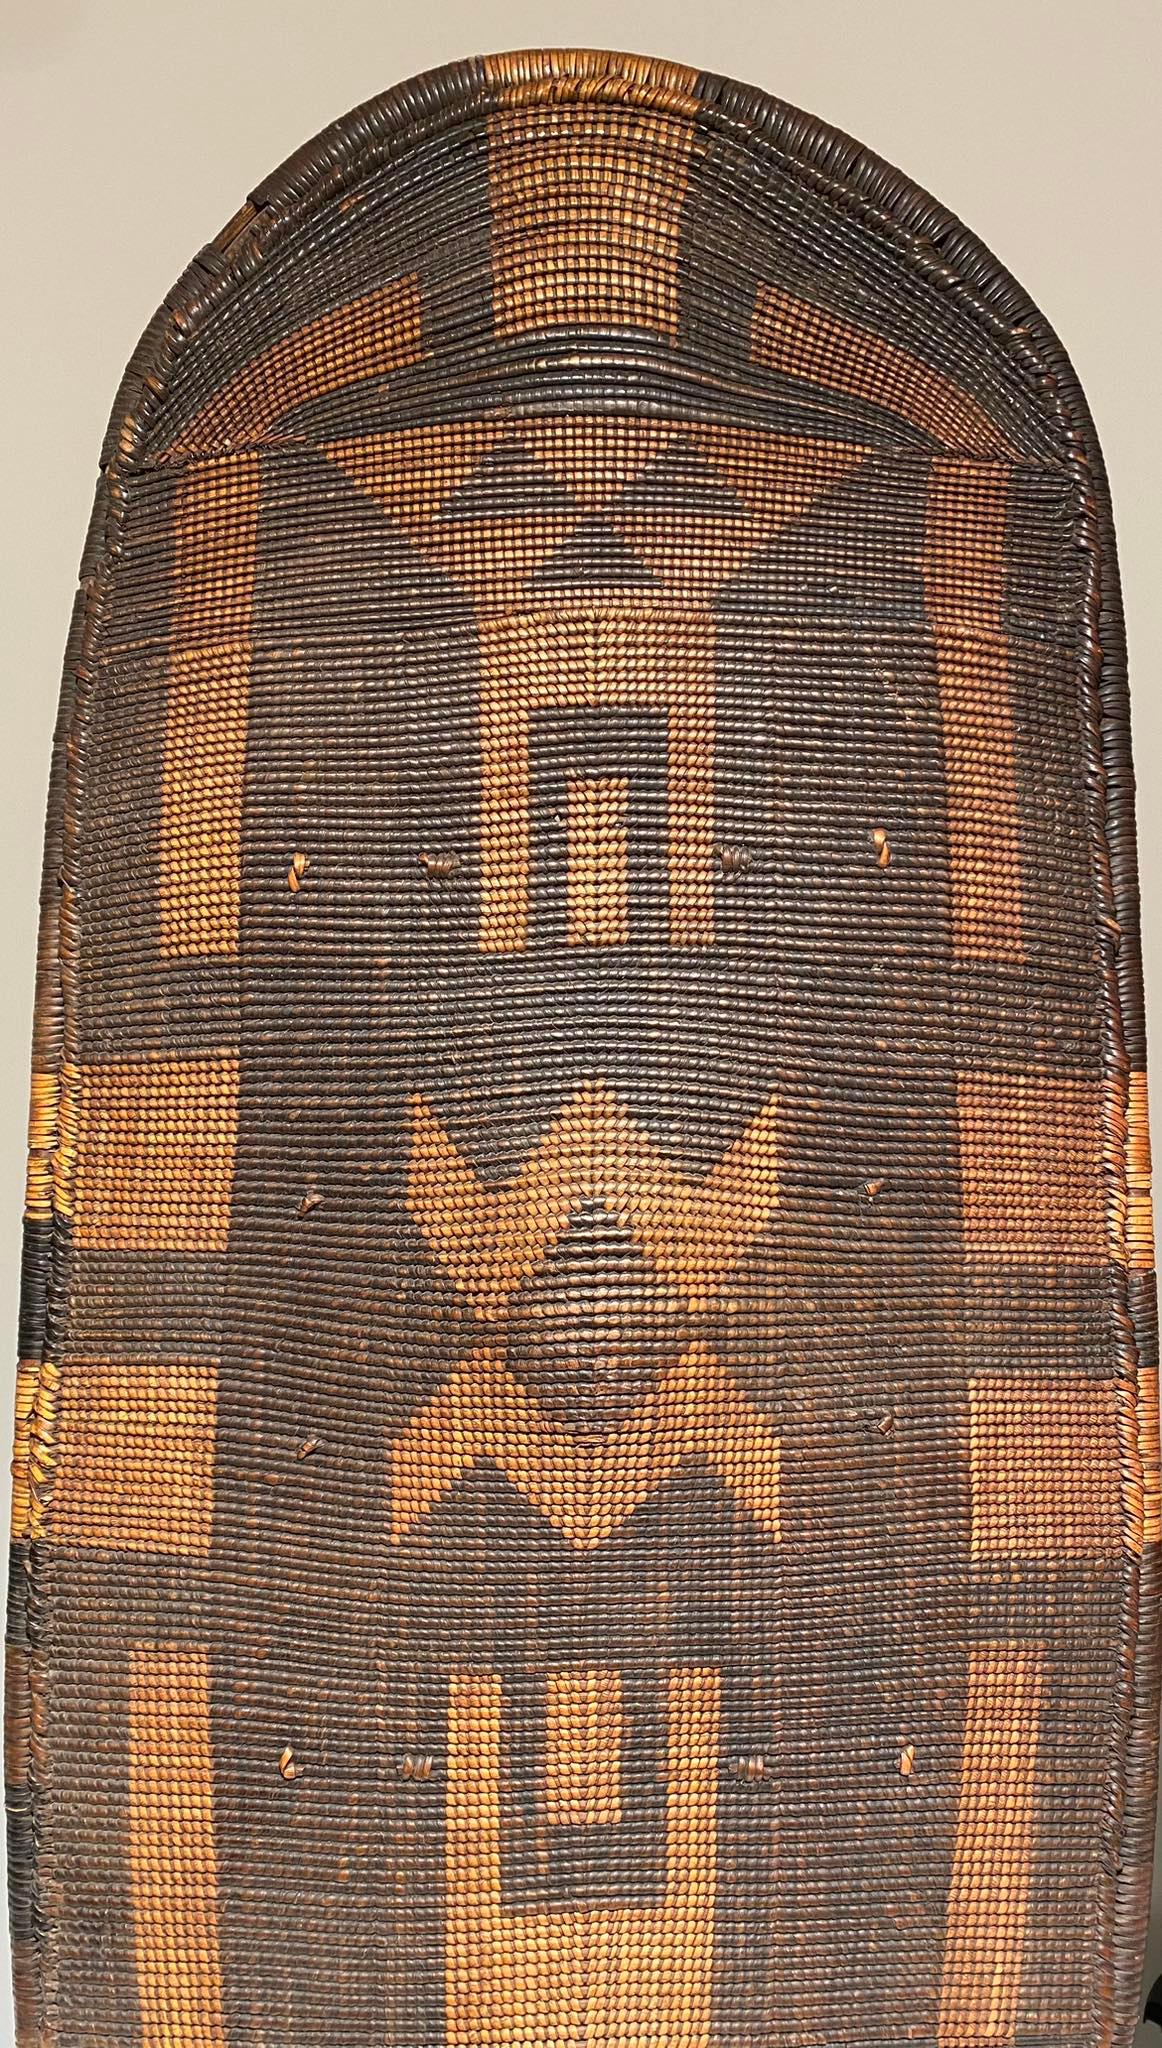 Gbilija Zande tribe Shield - Nzakara - Dr Congo - 19th Century - African Art In Good Condition For Sale In Leuven, BE